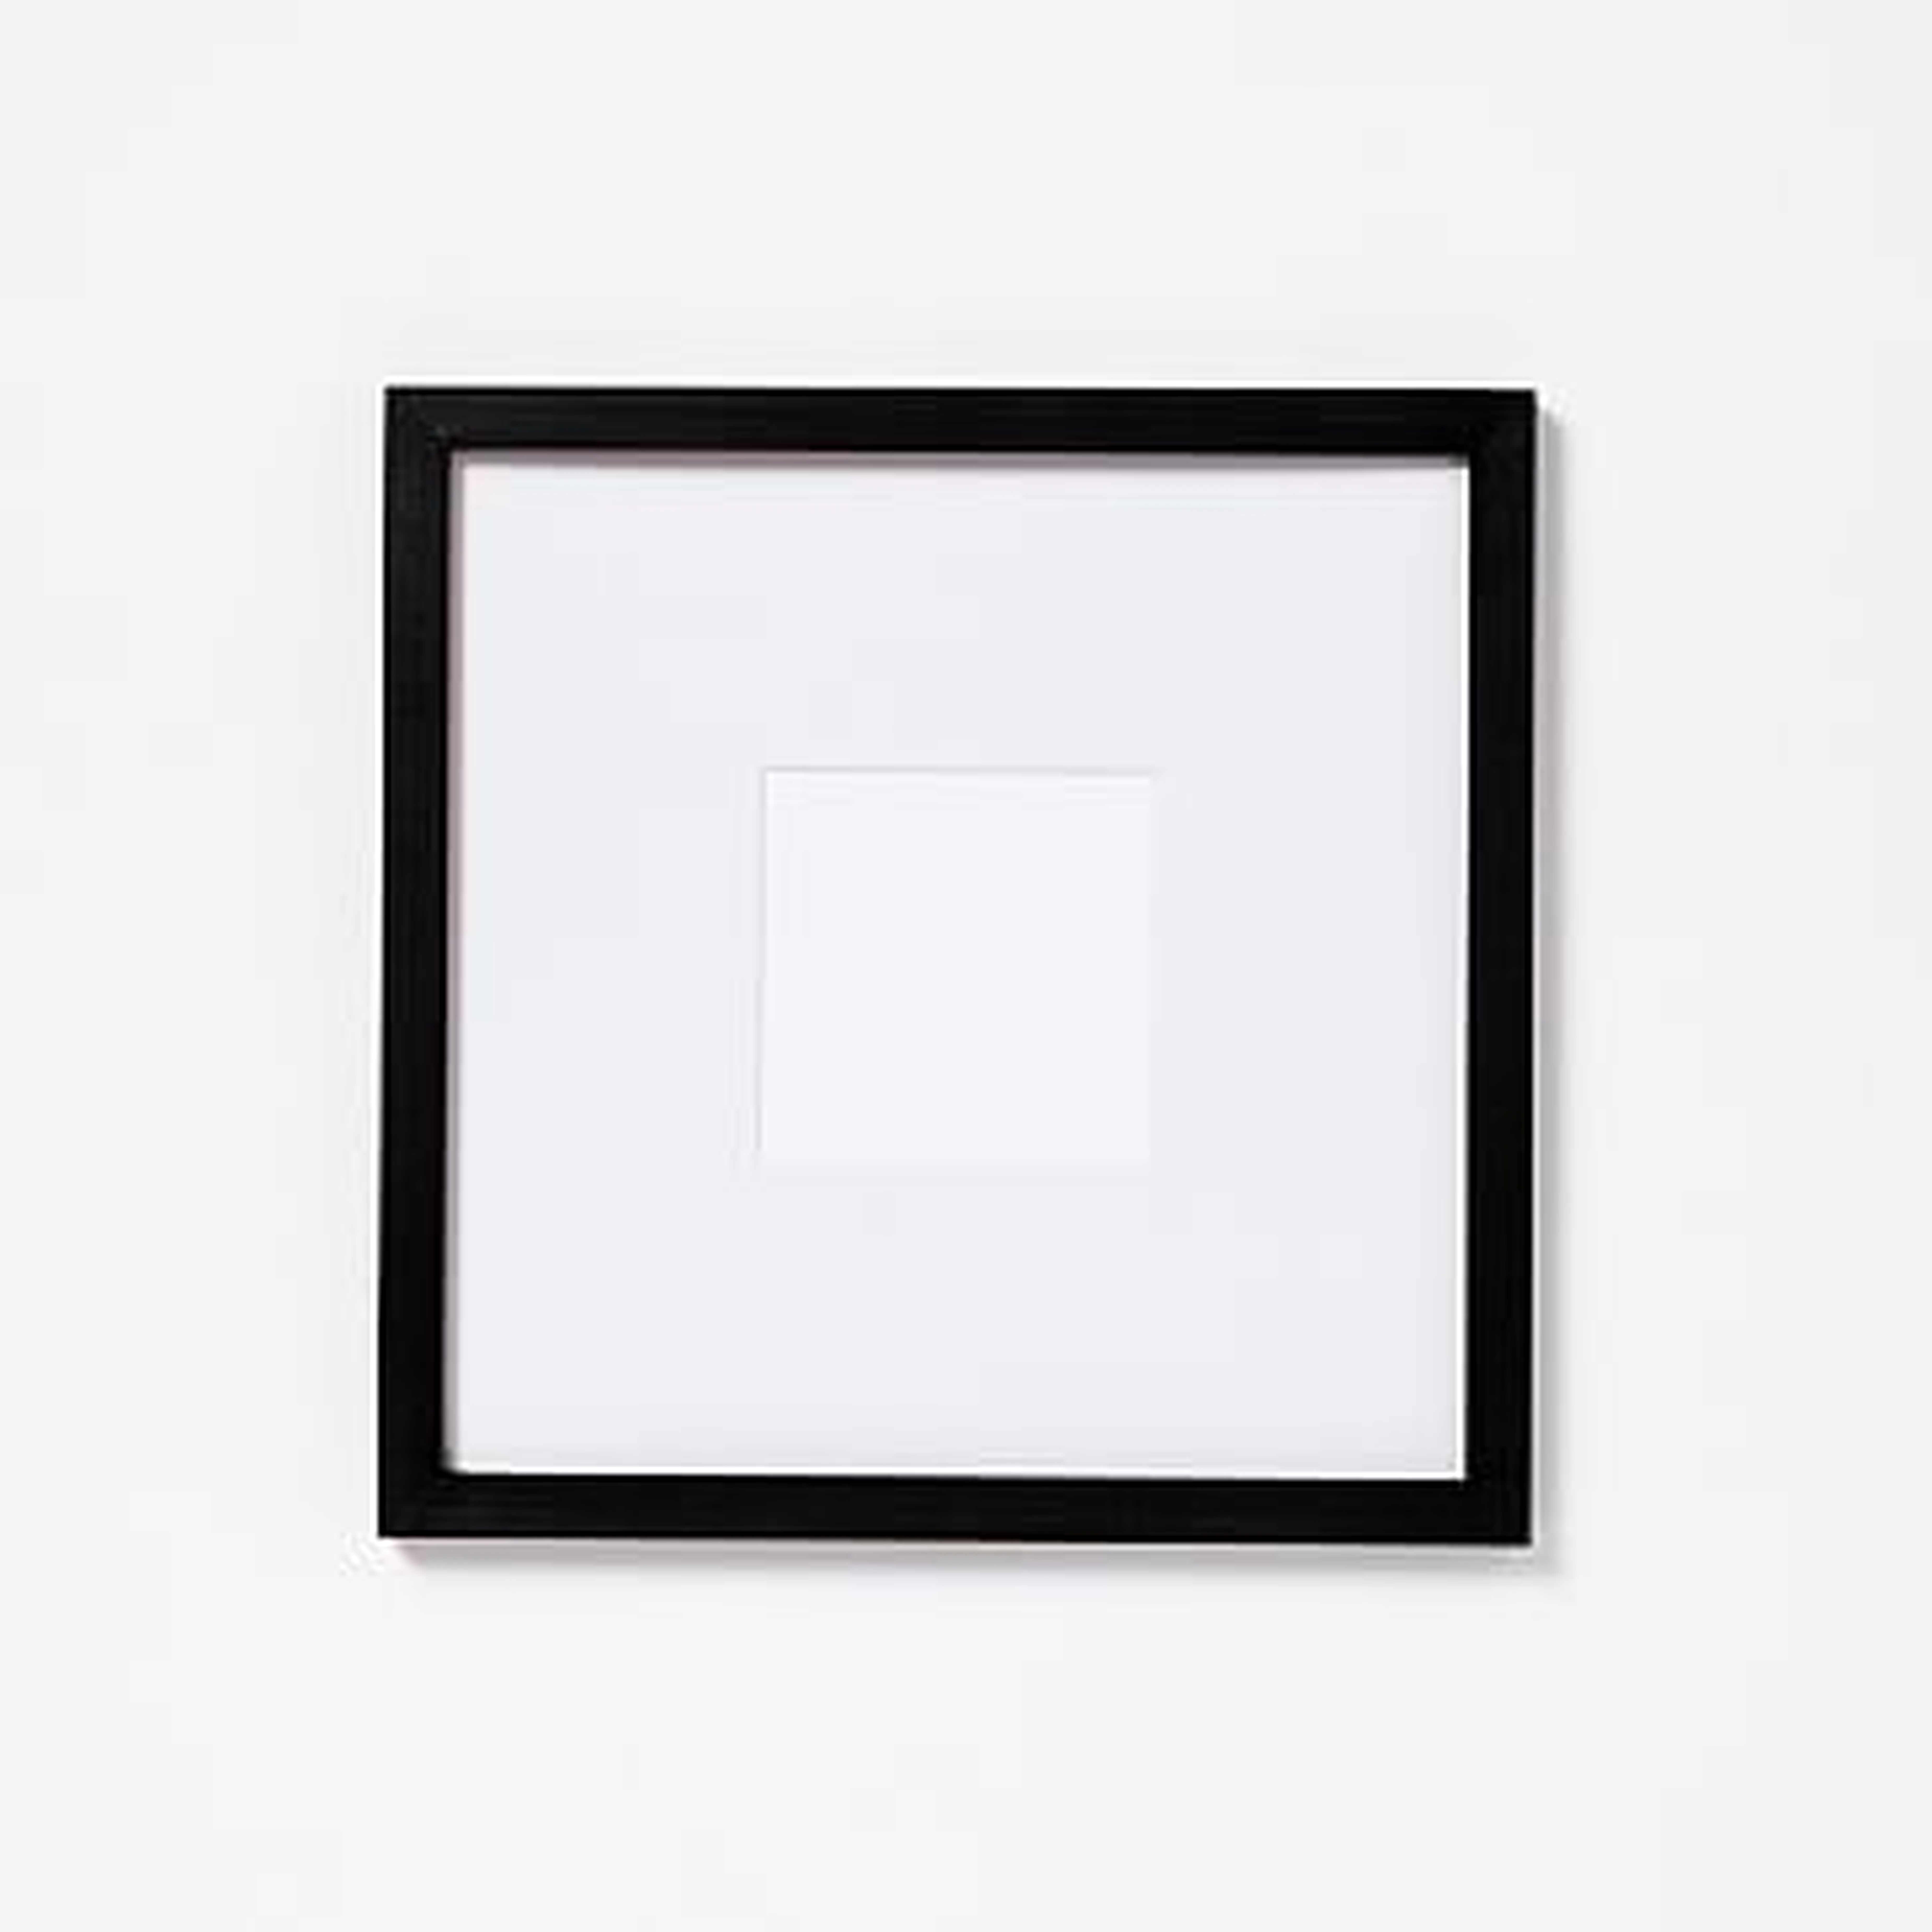 Gallery Frames, 5"x 7" (12" x 12" without mat), Black Lacquer - West Elm